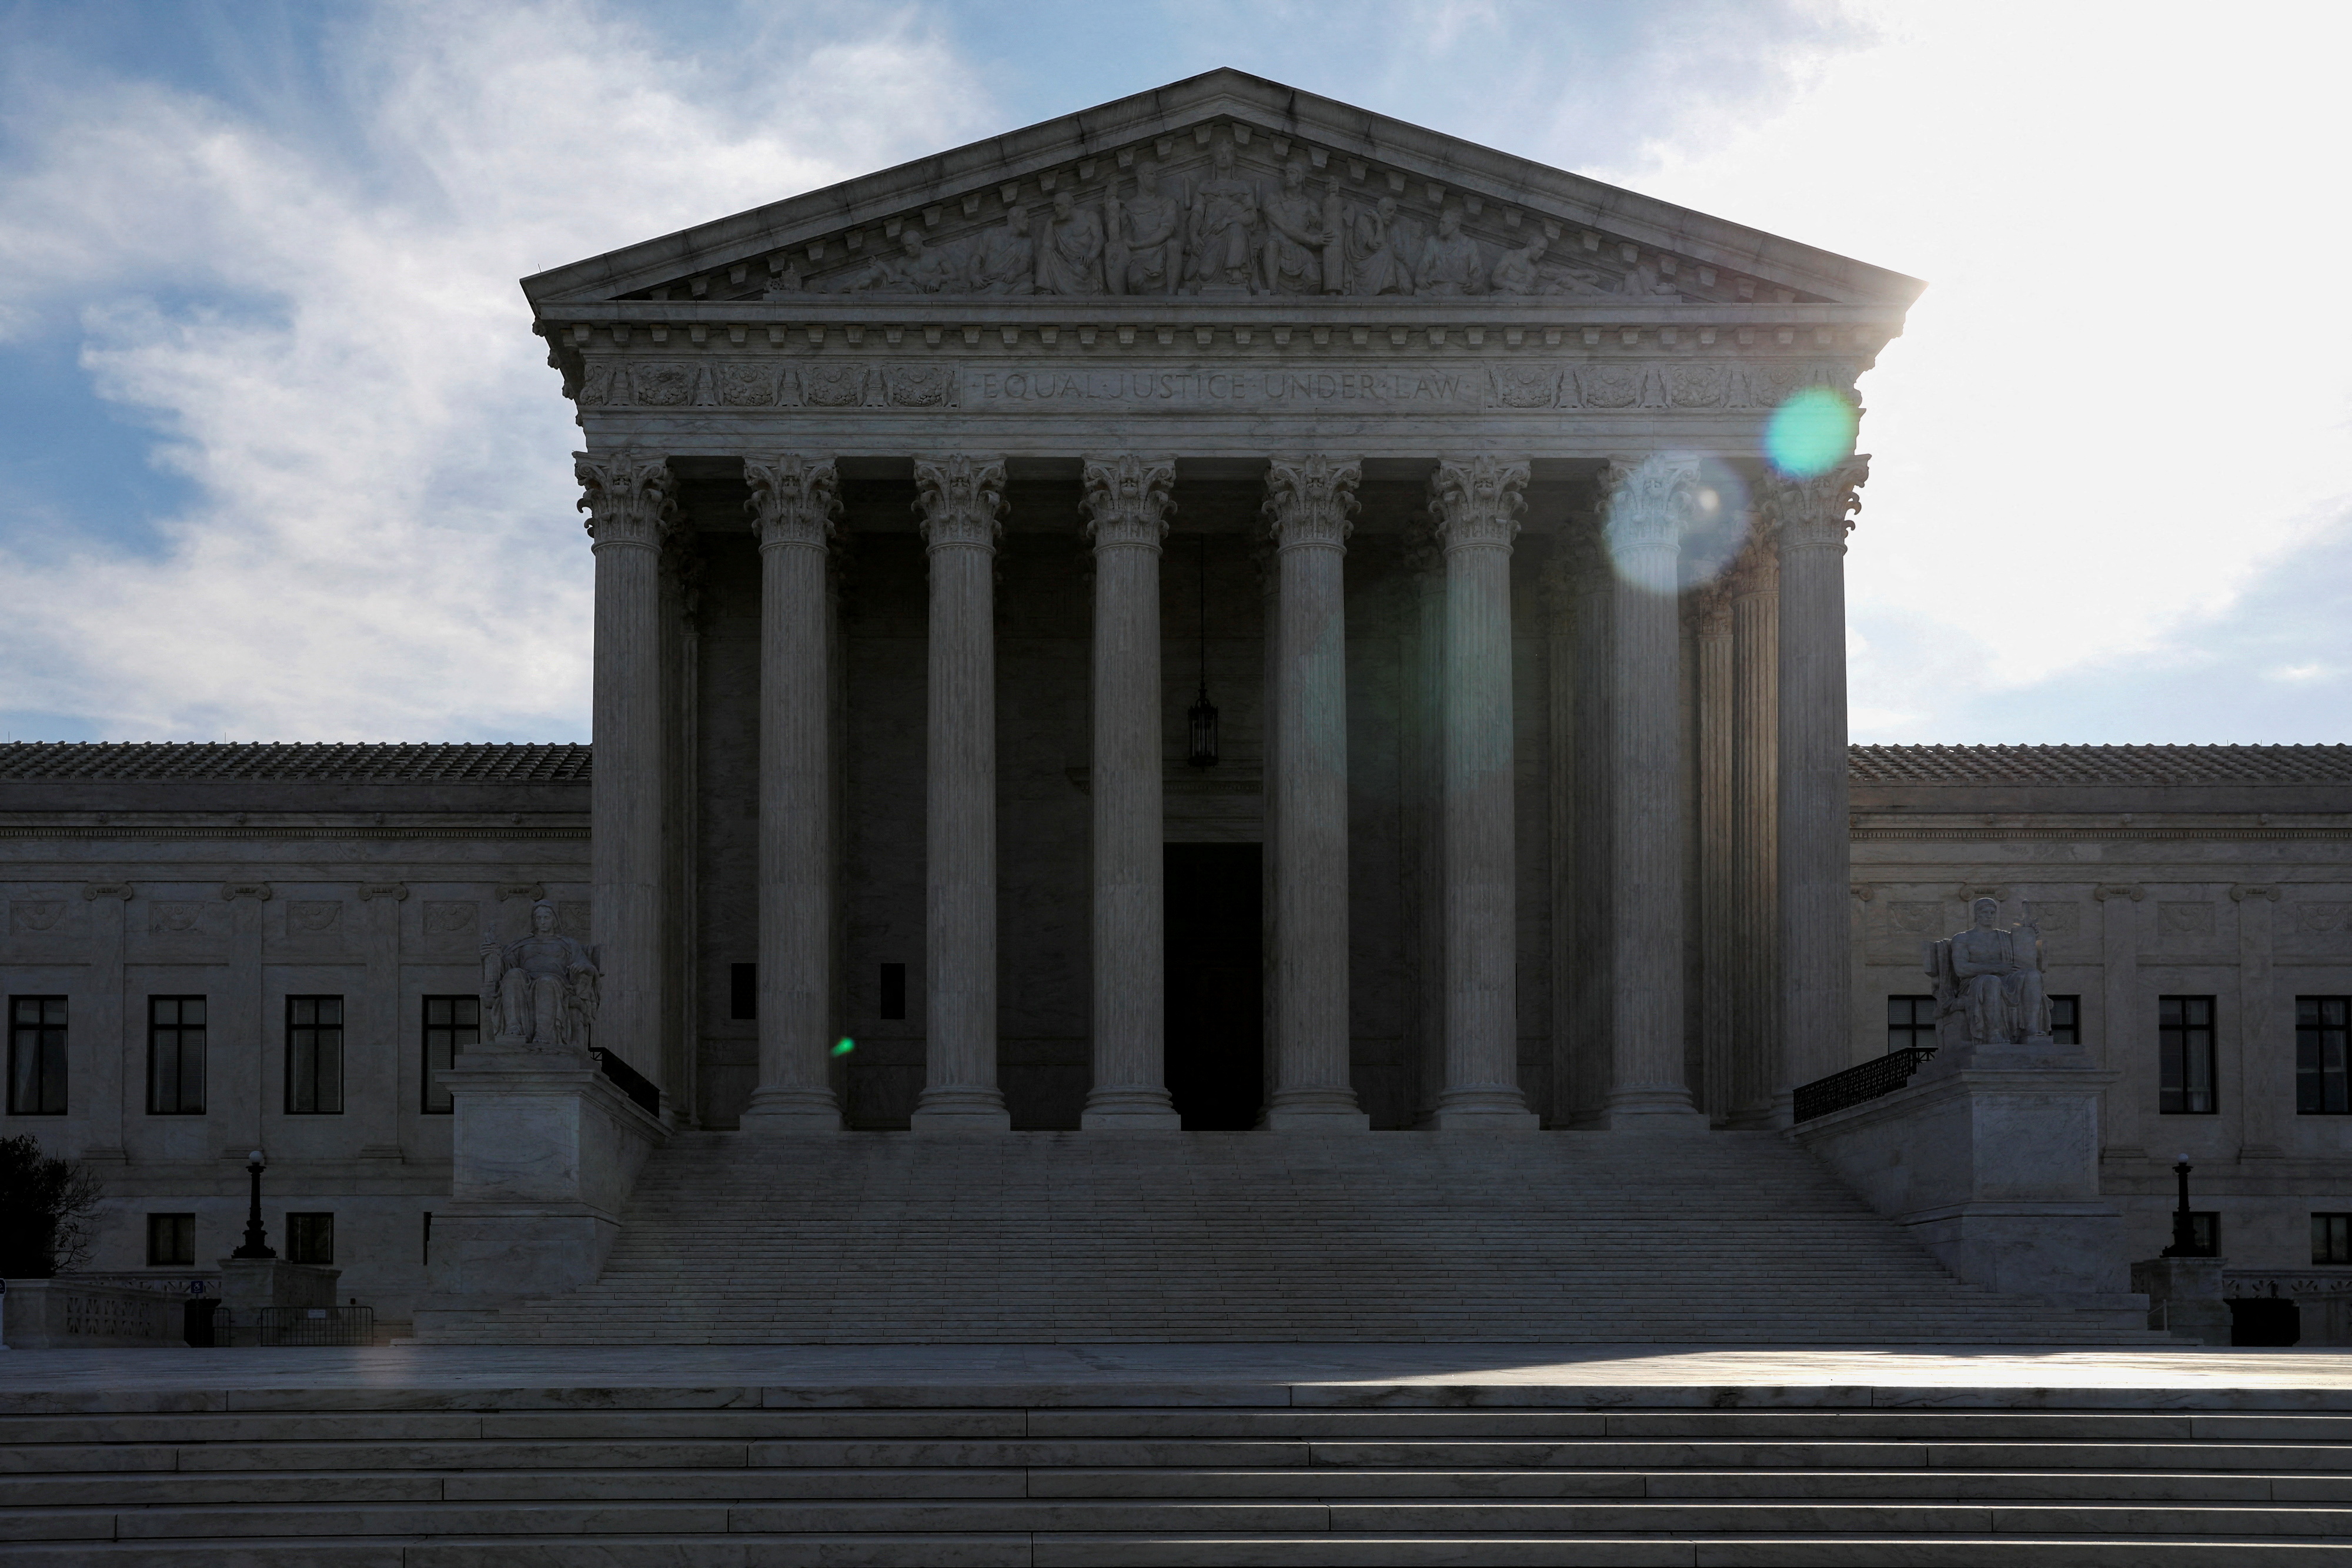 The U.S. Supreme Court building is pictured in Washington